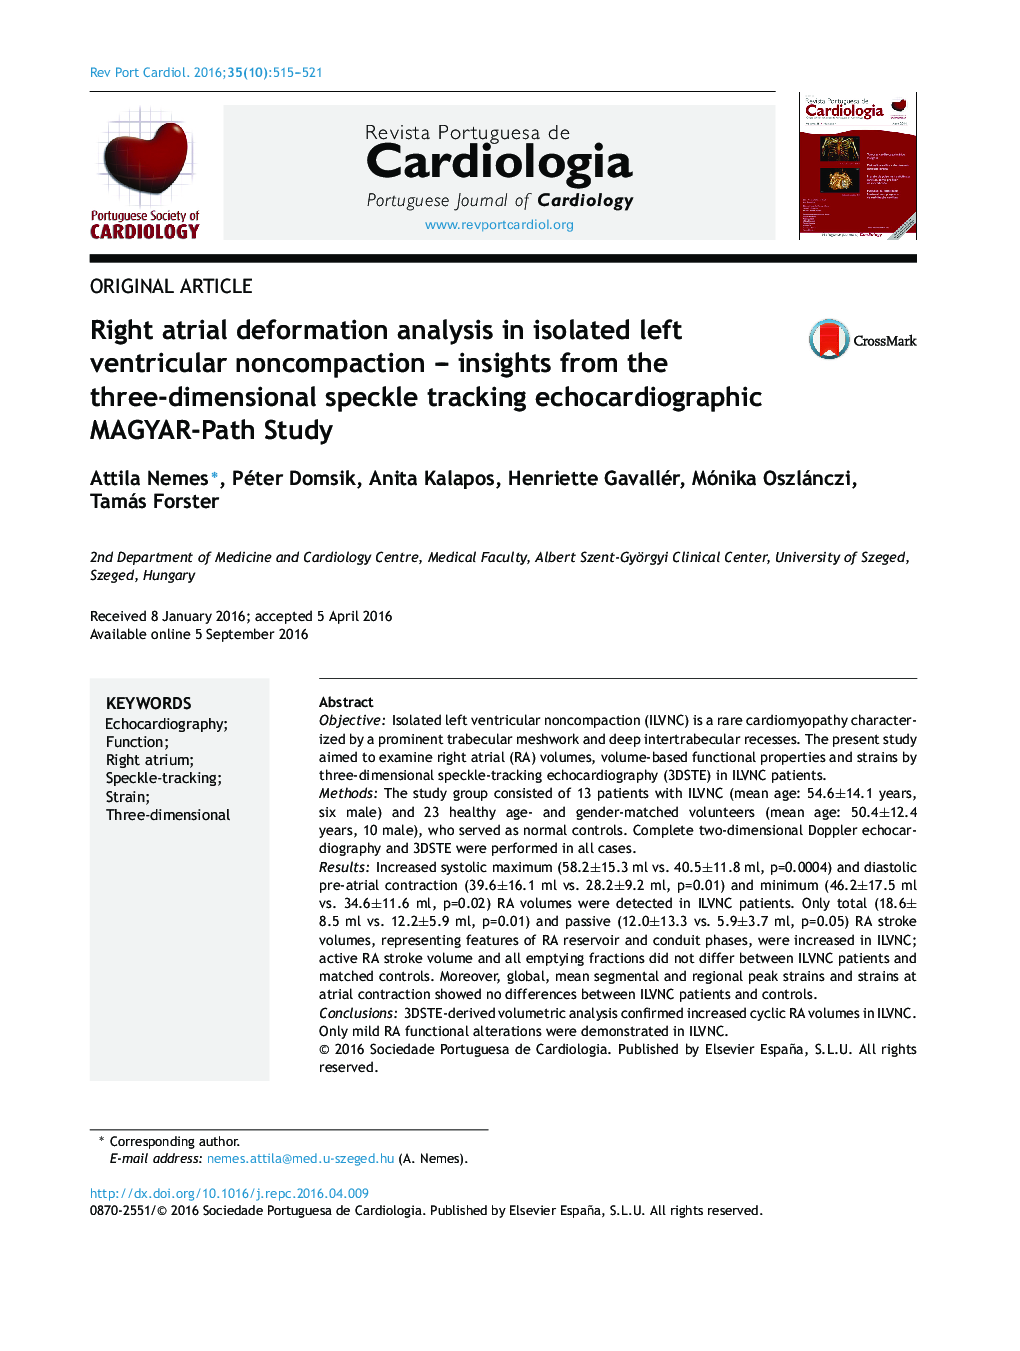 Right atrial deformation analysis in isolated left ventricular noncompaction - insights from the three-dimensional speckle tracking echocardiographic MAGYAR-Path Study